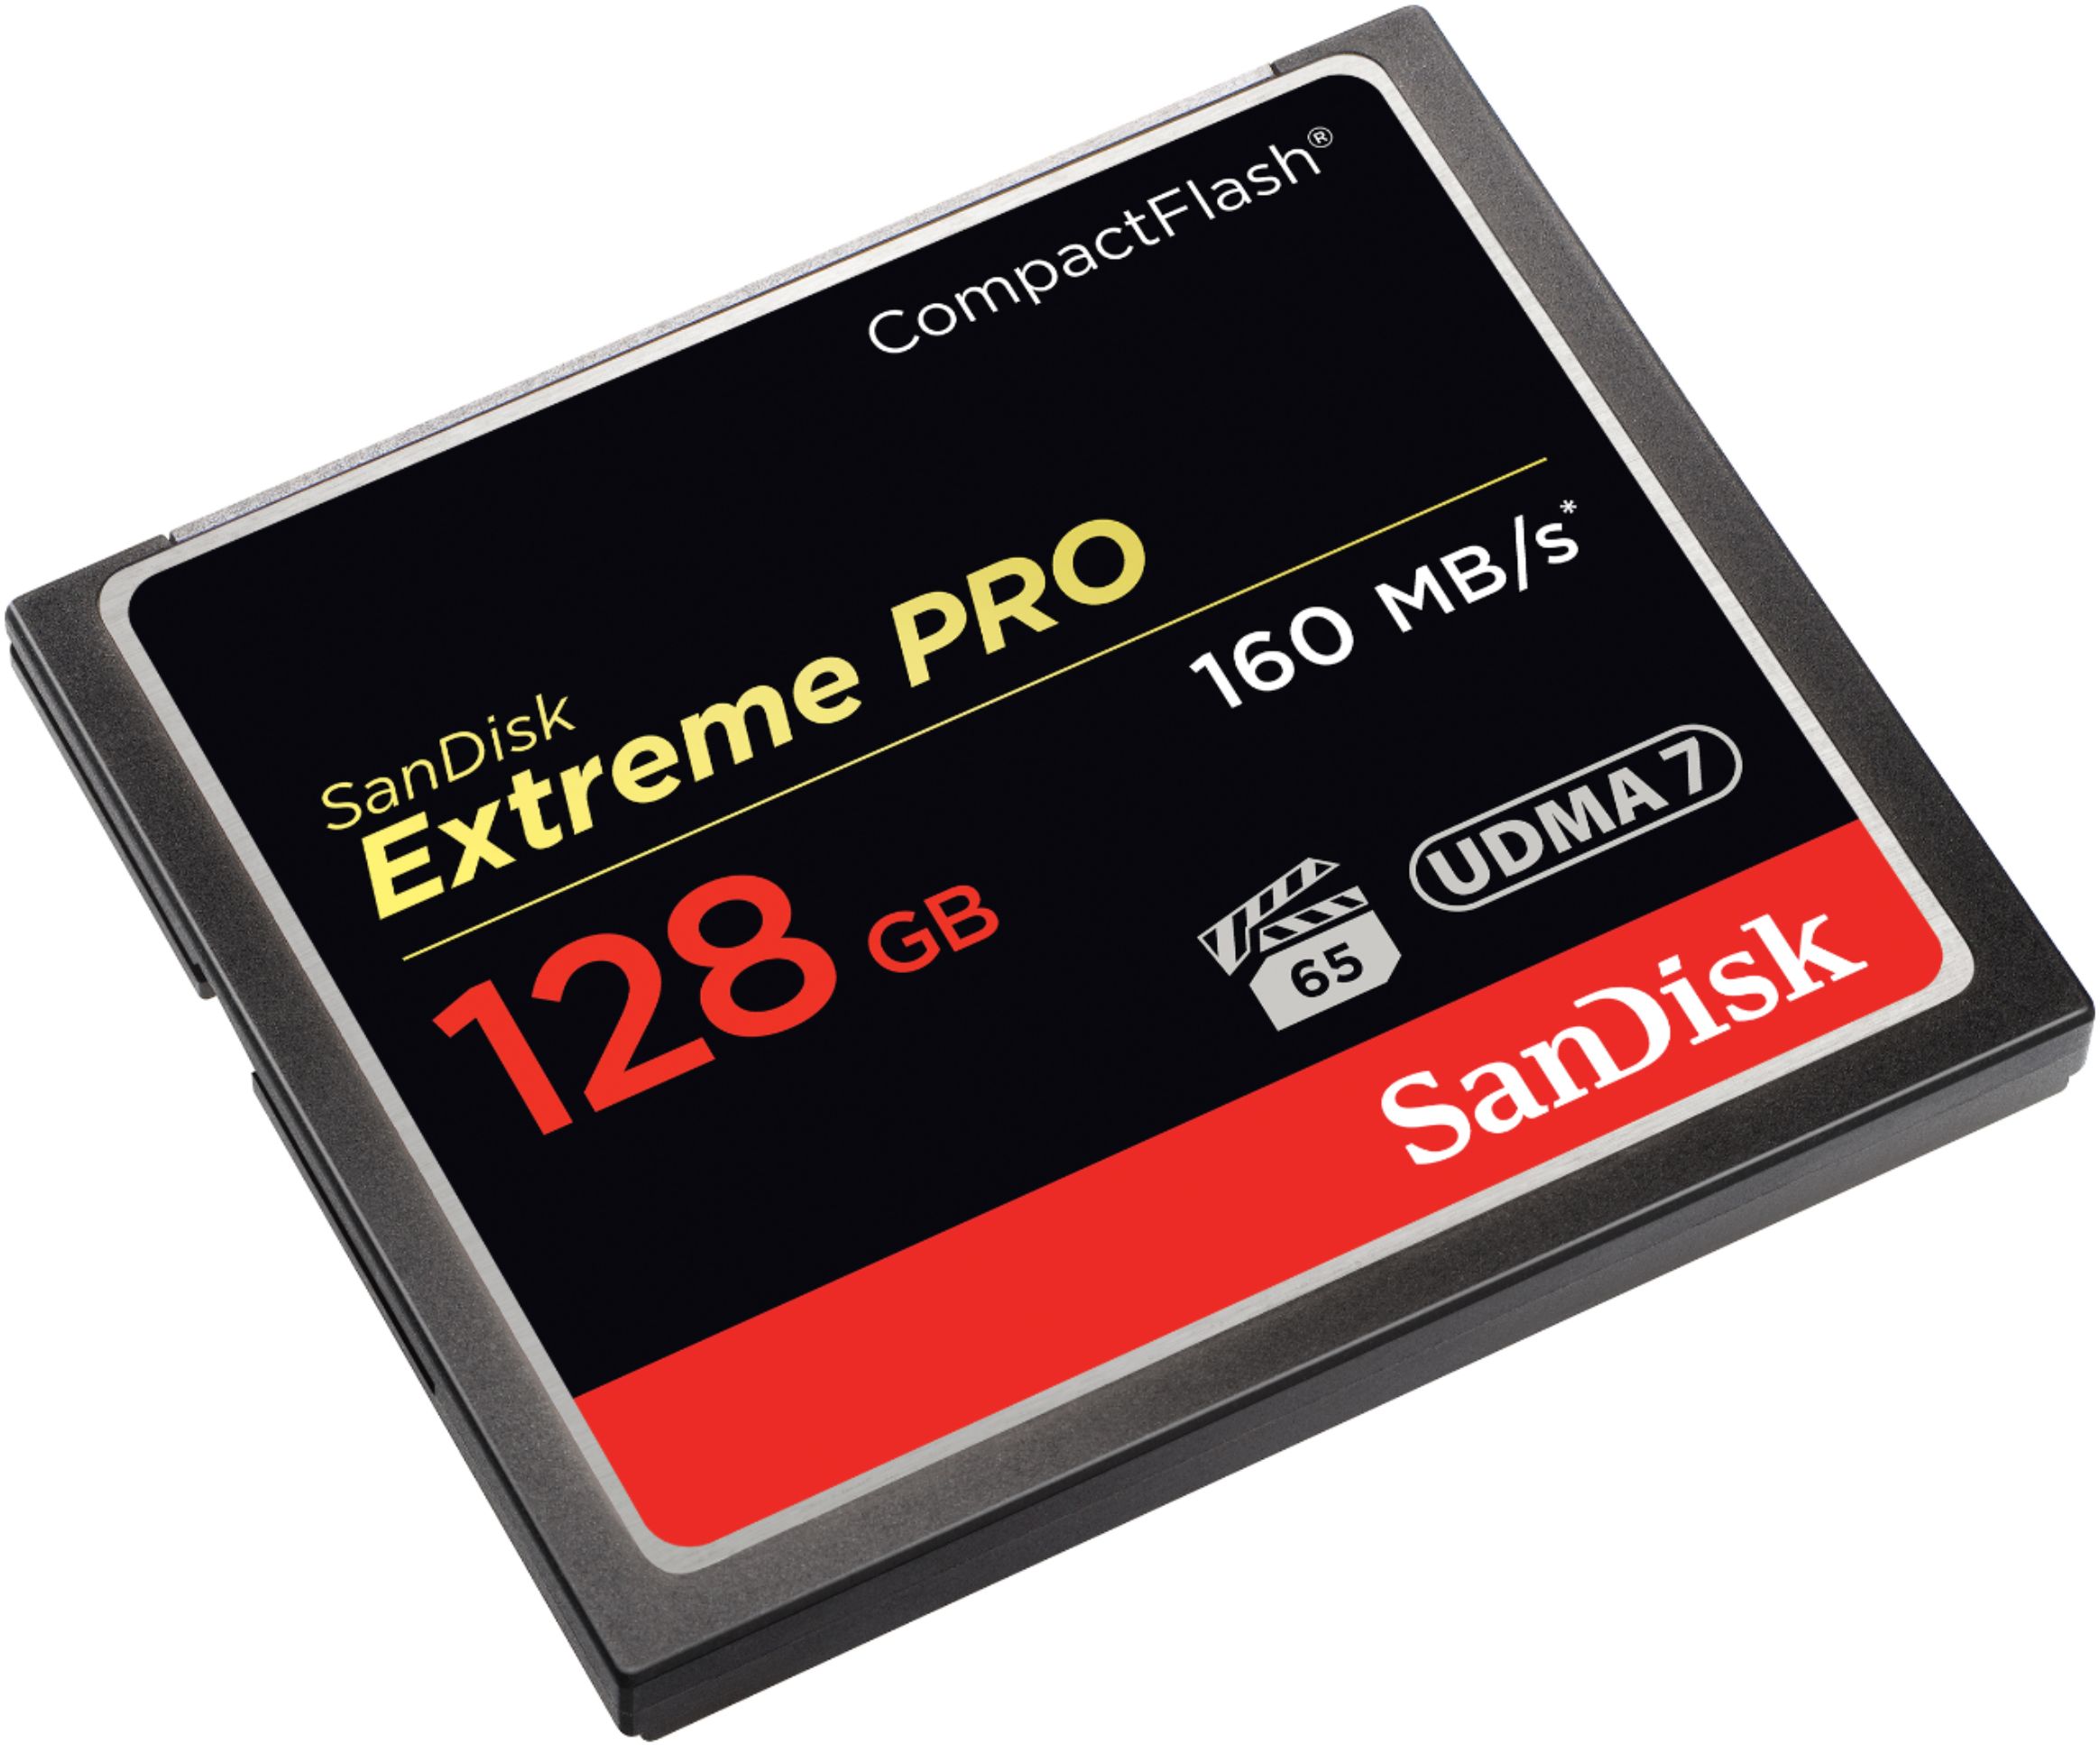 SanDisk Extreme PRO 128GB CompactFlash (CF) Memory Card SDCFXPS-128G-A46 -  Best Buy